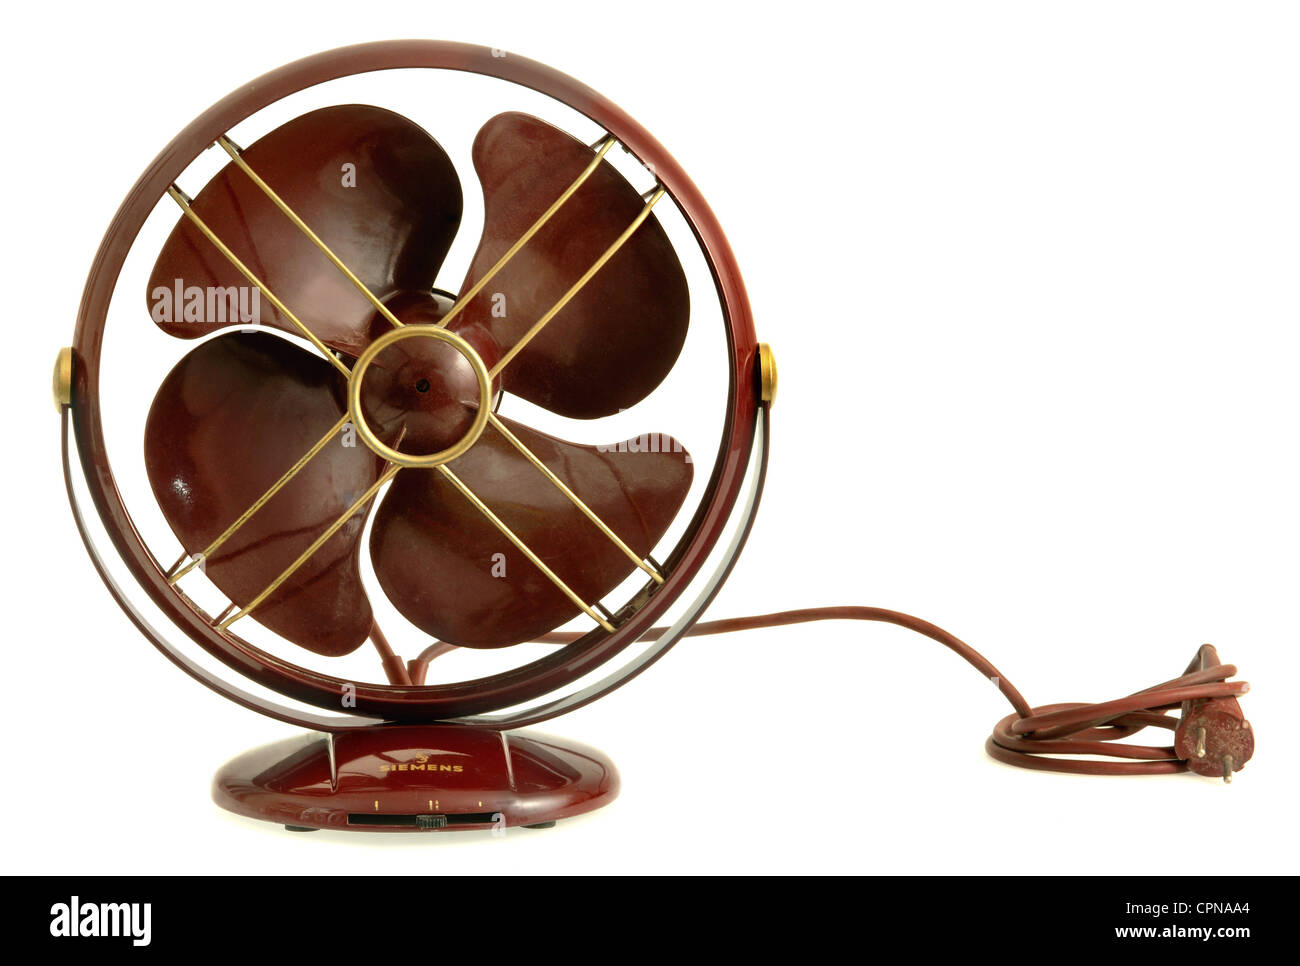 technics, ventilator, table fan by Siemens, bakelite, Germany, circa 1953,  Additional-Rights-Clearences-Not Available Stock Photo - Alamy